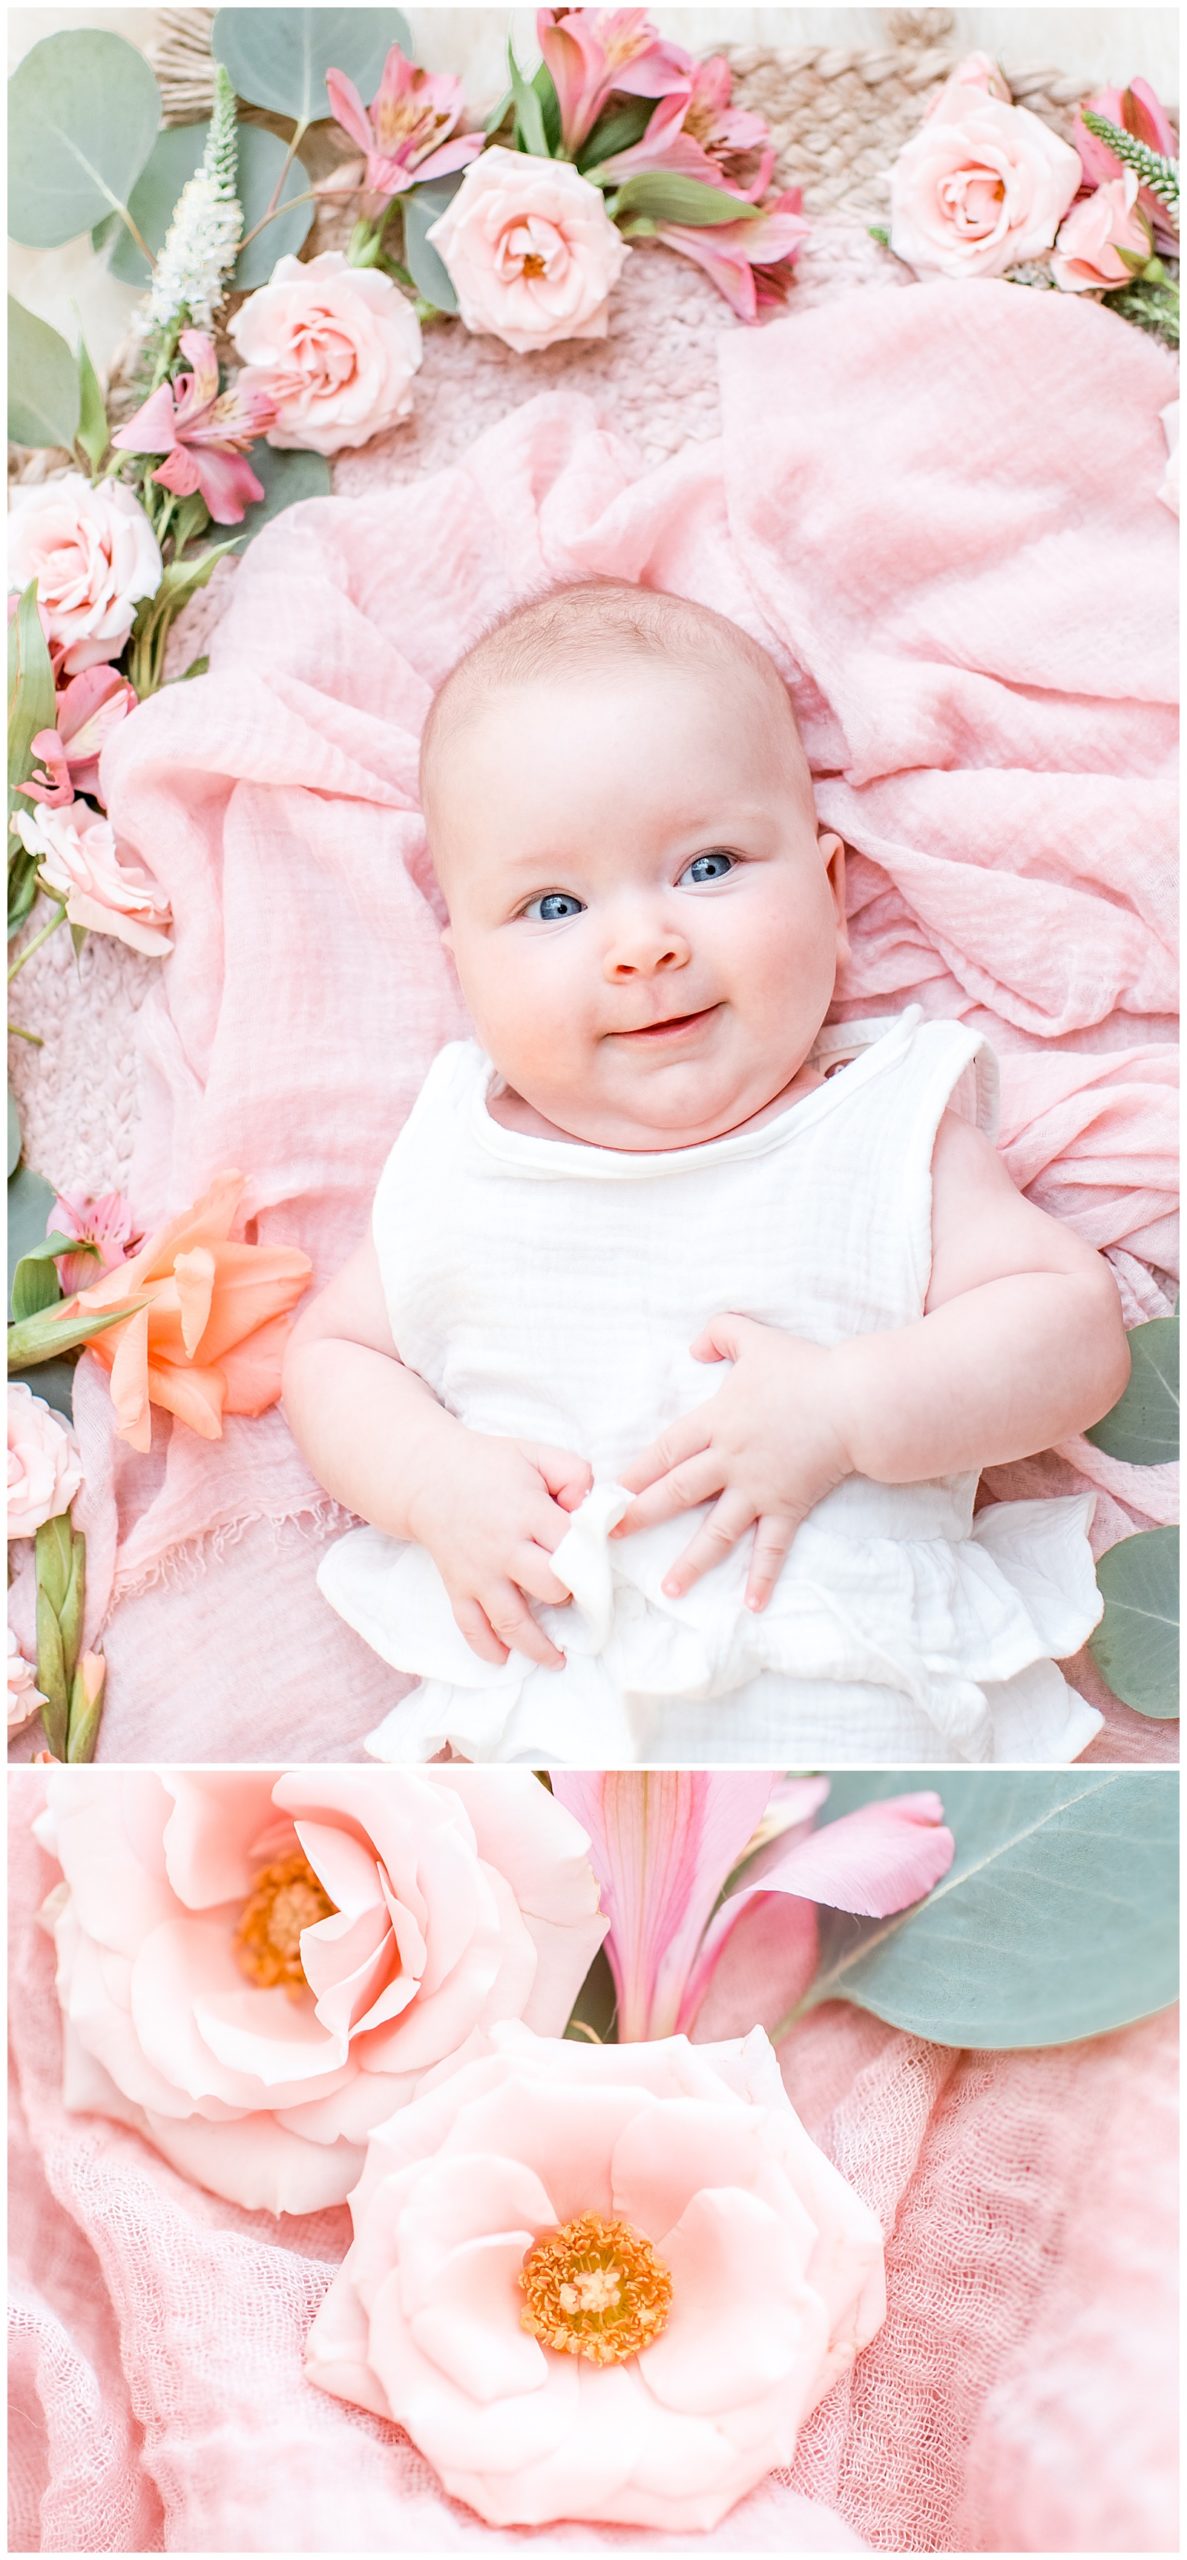 Babies and Flowers newborn photography by relics of rainbows photo